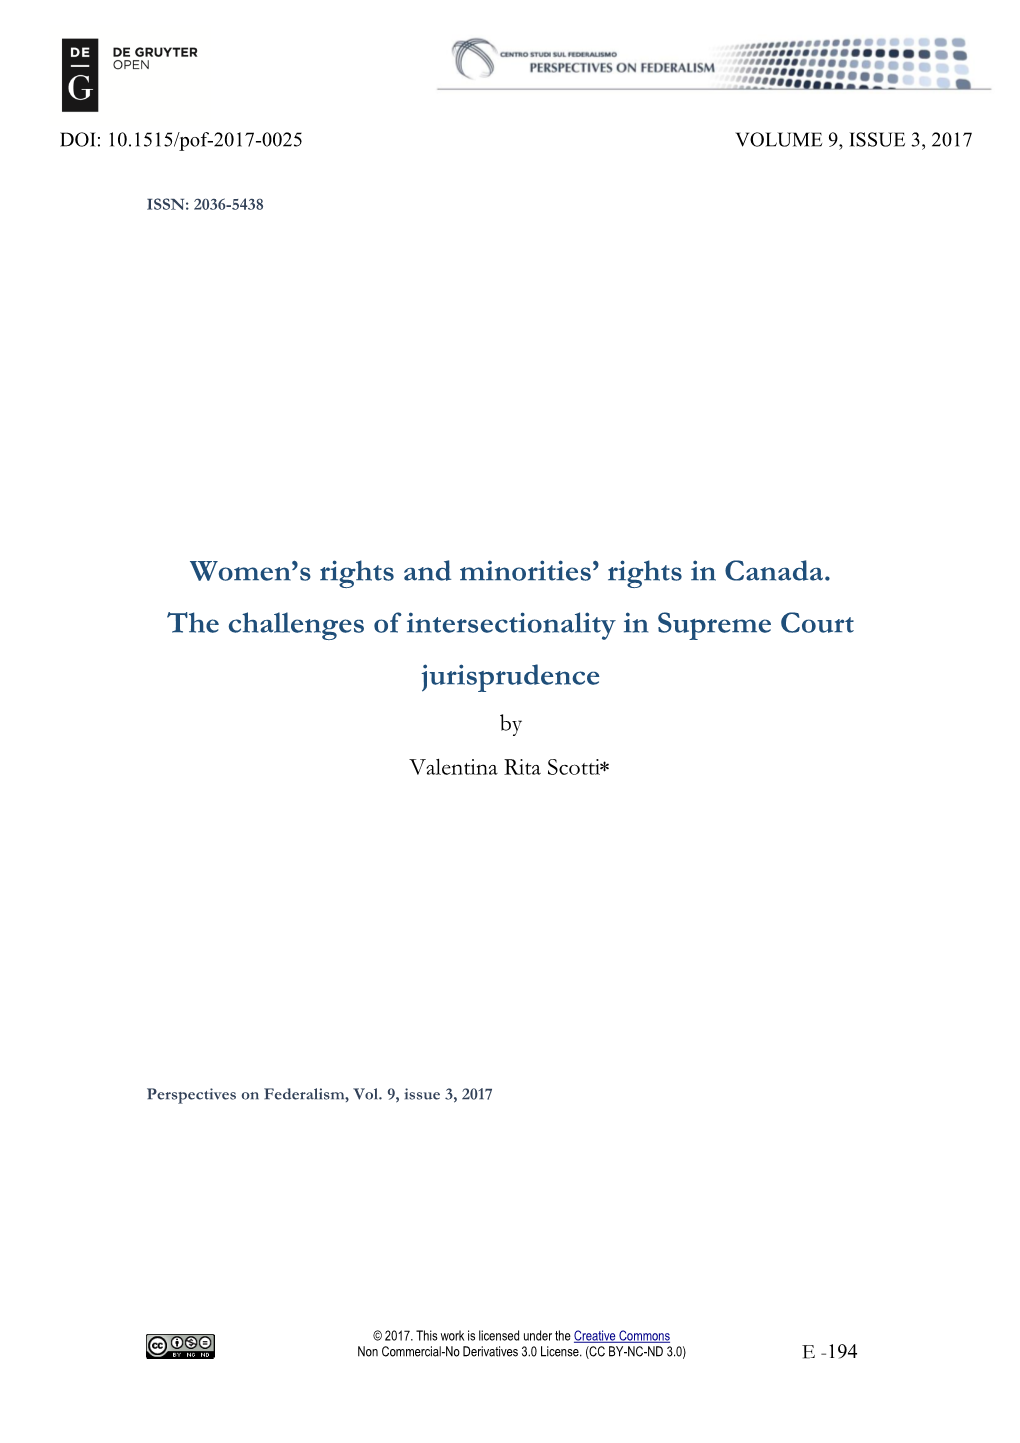 Women's Rights and Minorities' Rights in Canada. the Challenges Of